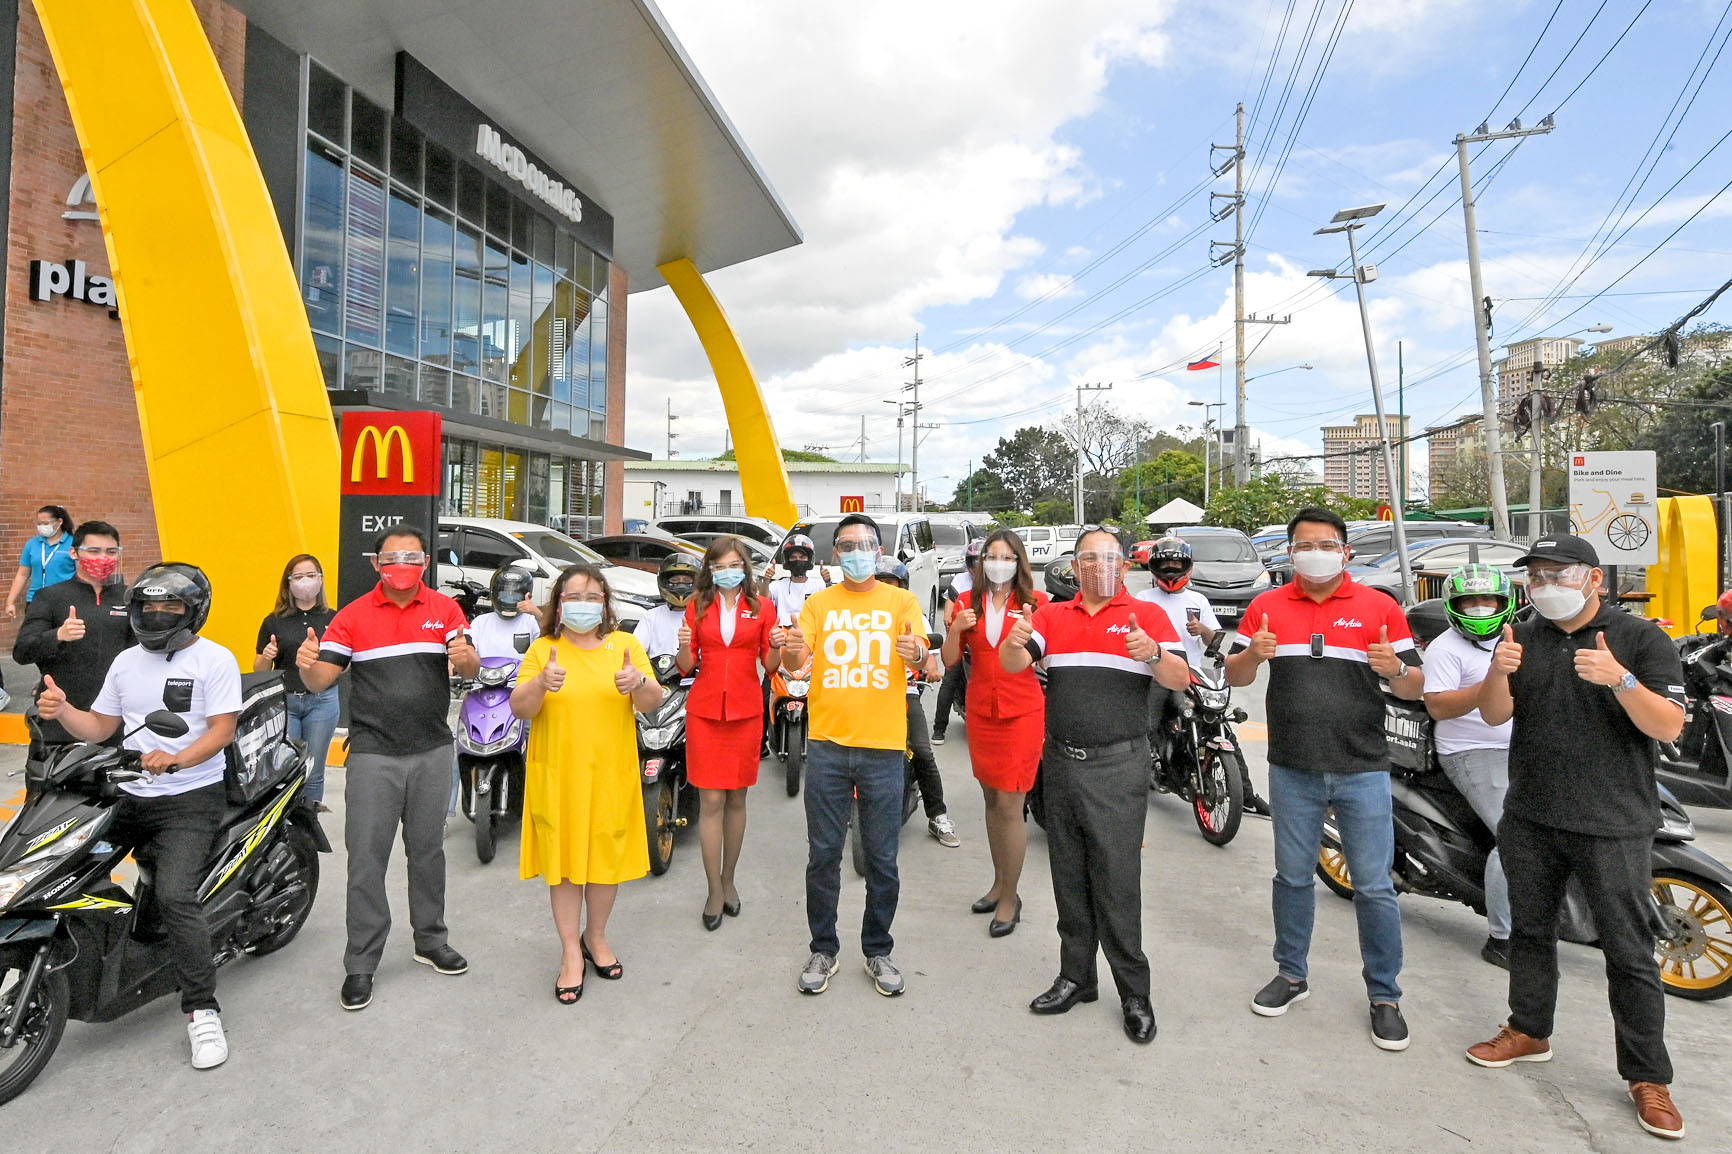 AirAsia ’s Teleport partners with food giant McDonald’s for timely and fast-moving deliveries